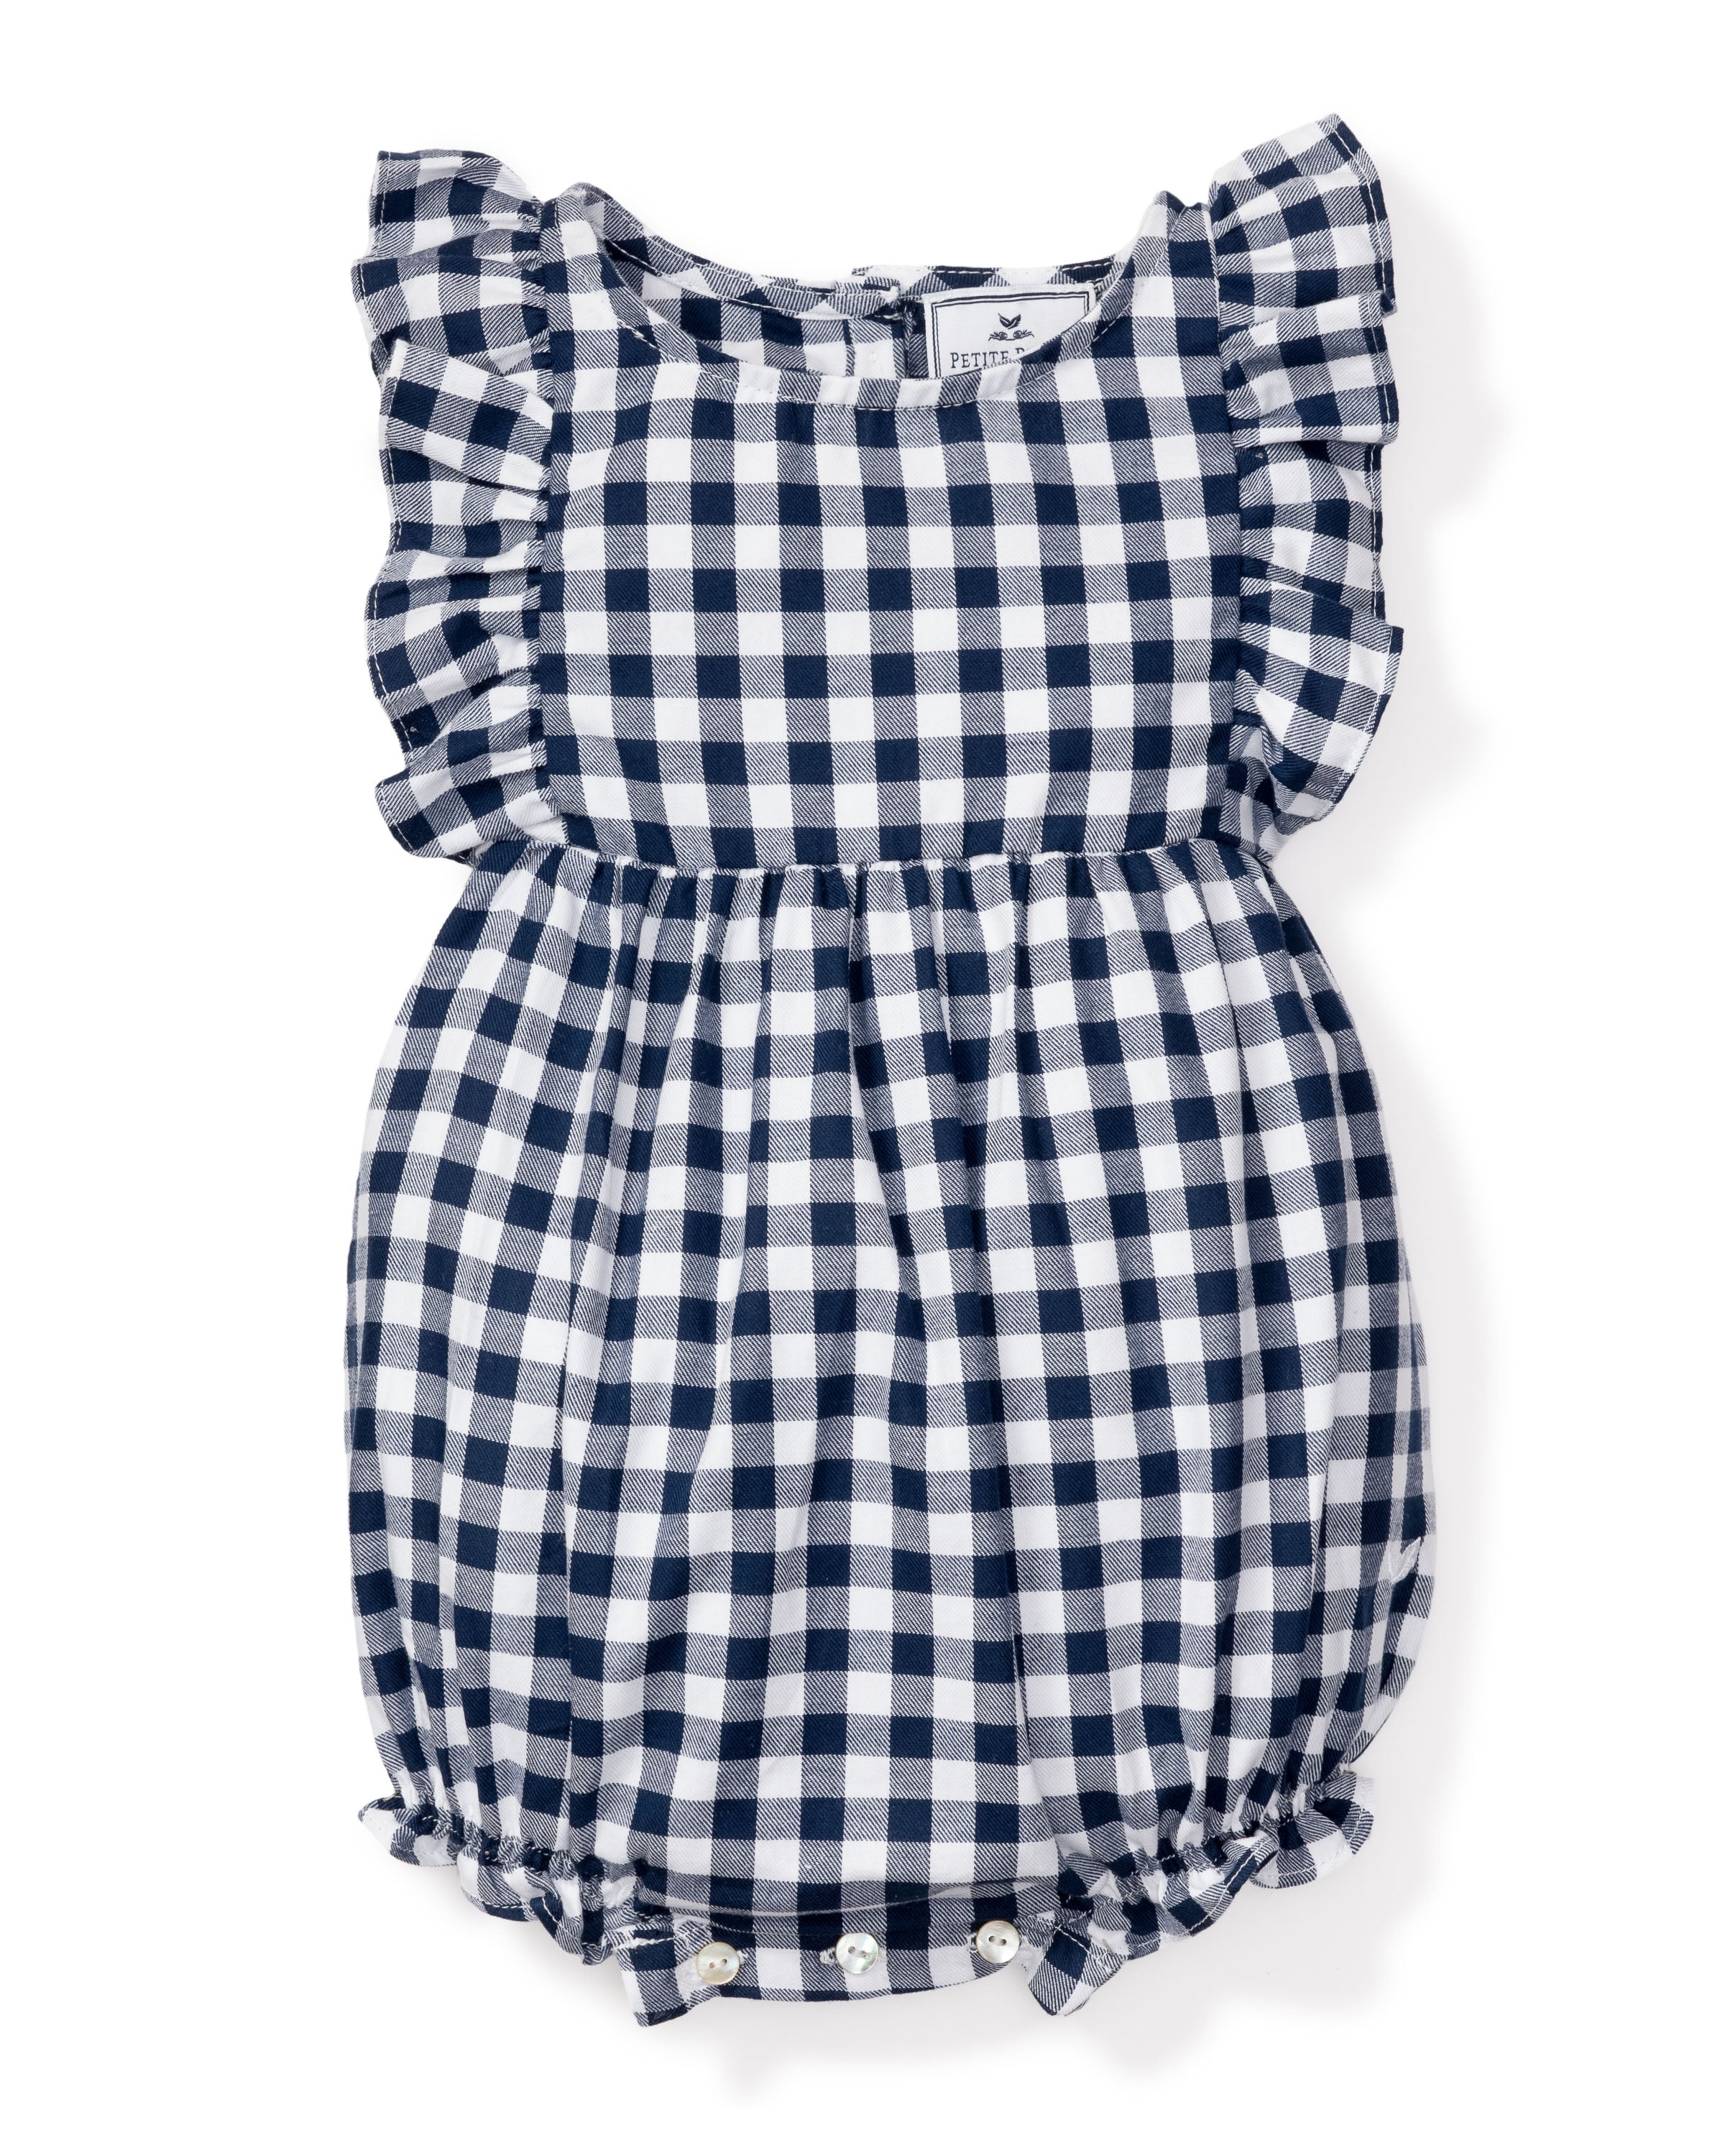 Baby's Twill Ruffled Romper in Navy Gingham